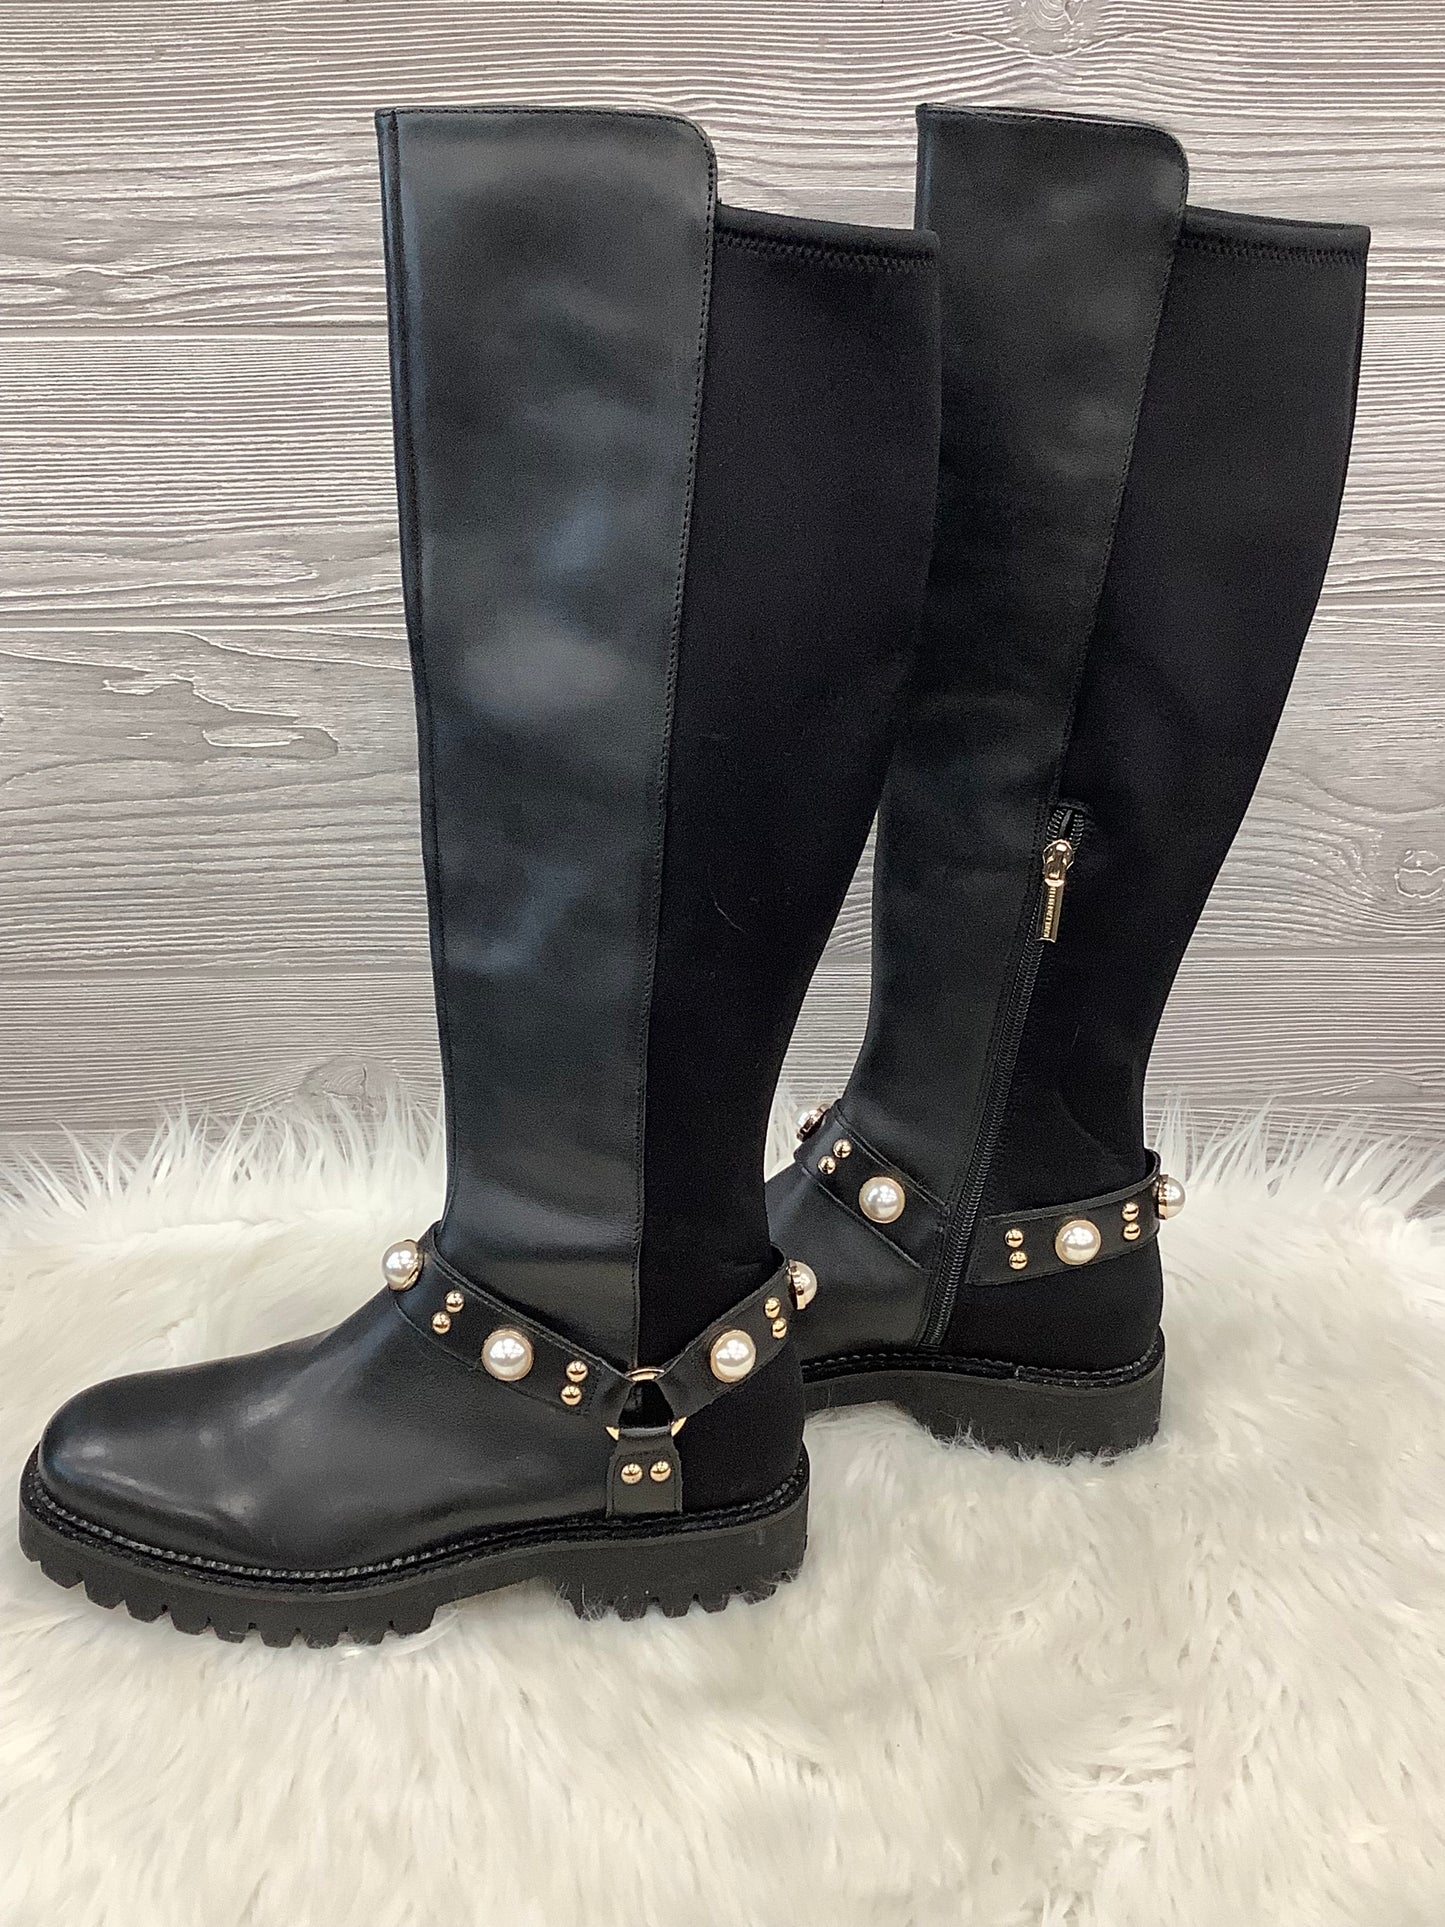 Boots Designer By Karl Lagerfeld  Size: 8.5